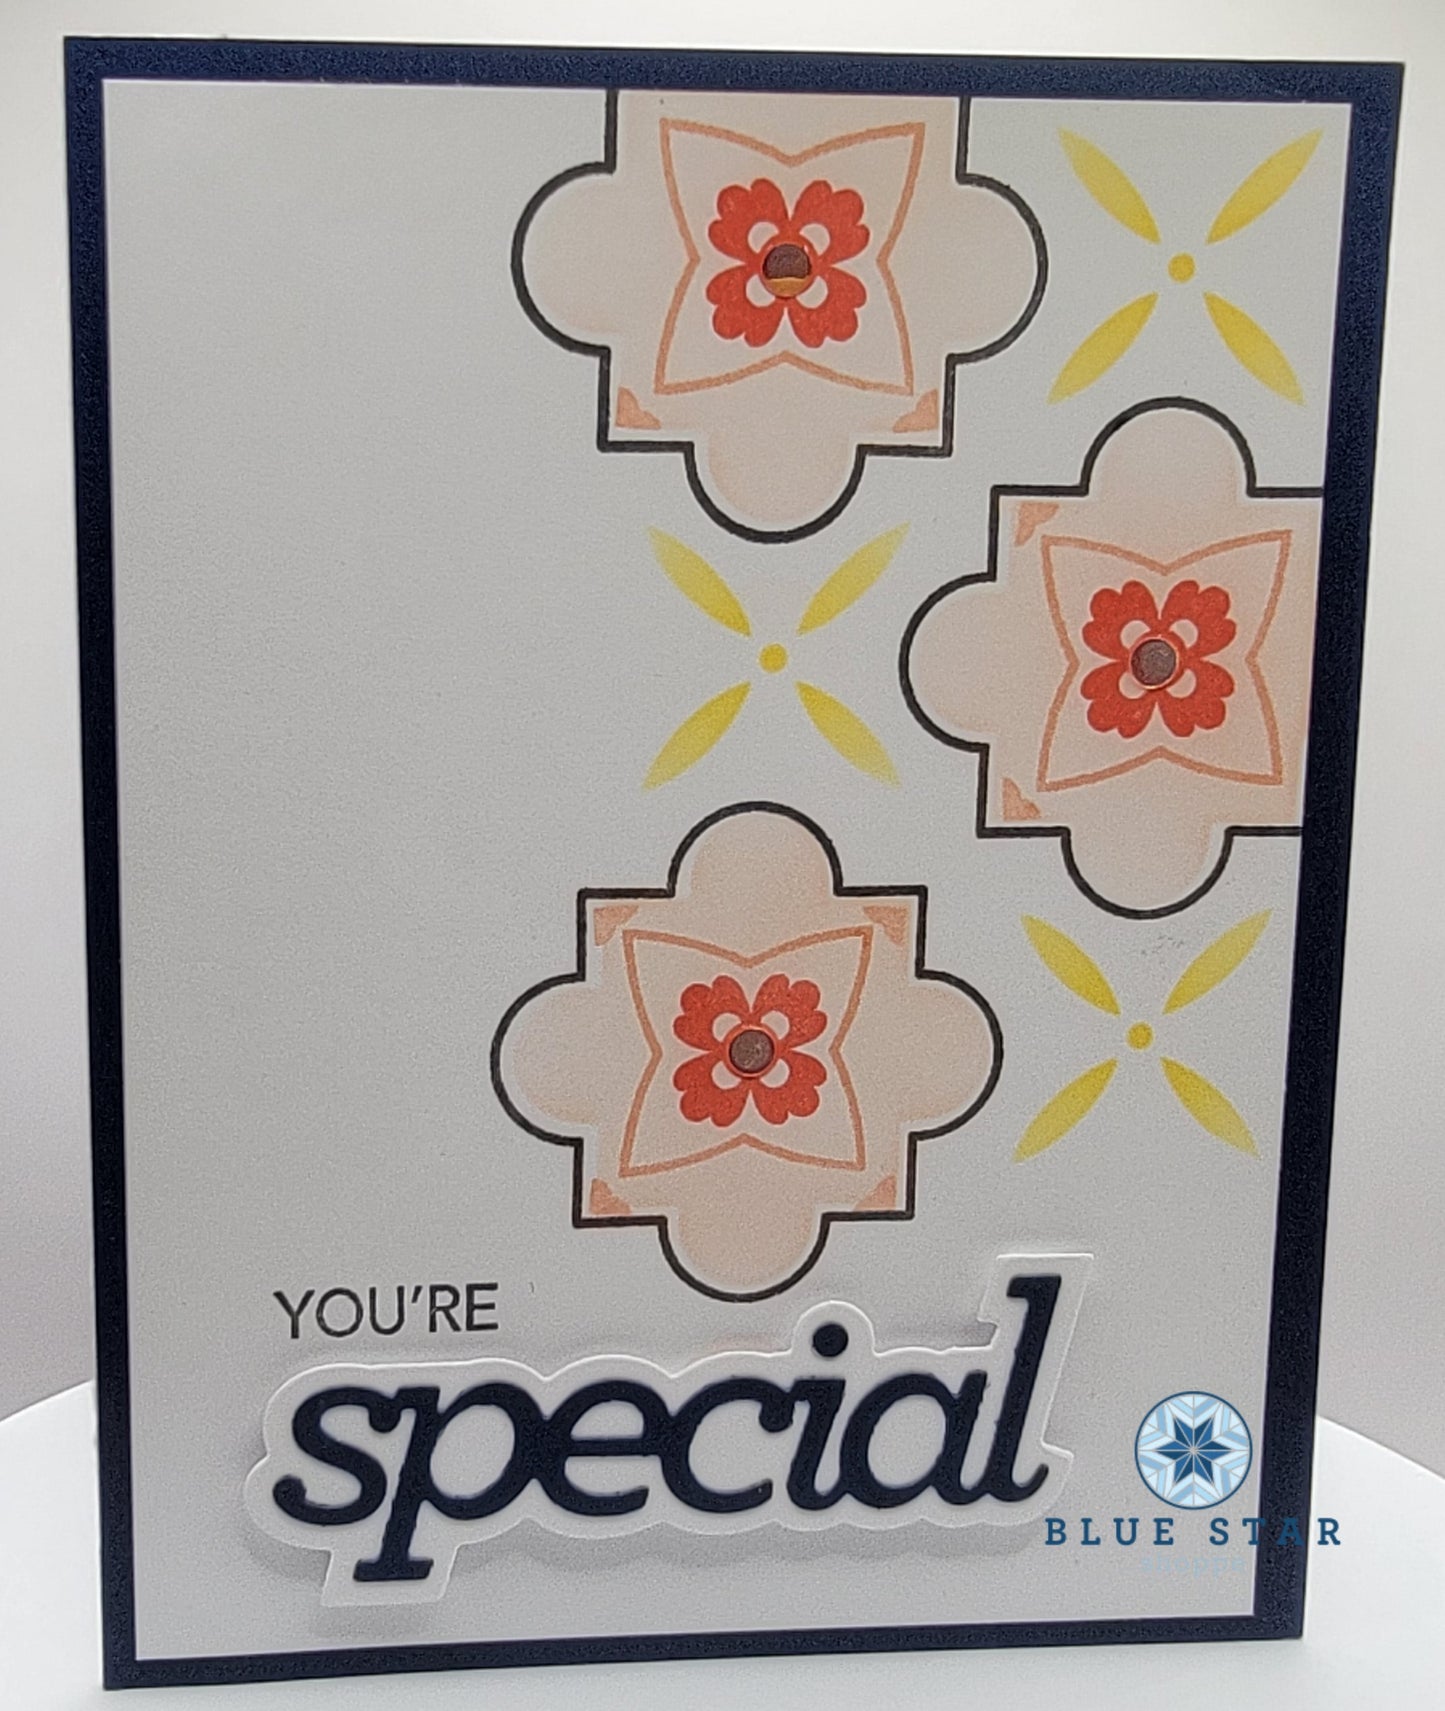 You're special